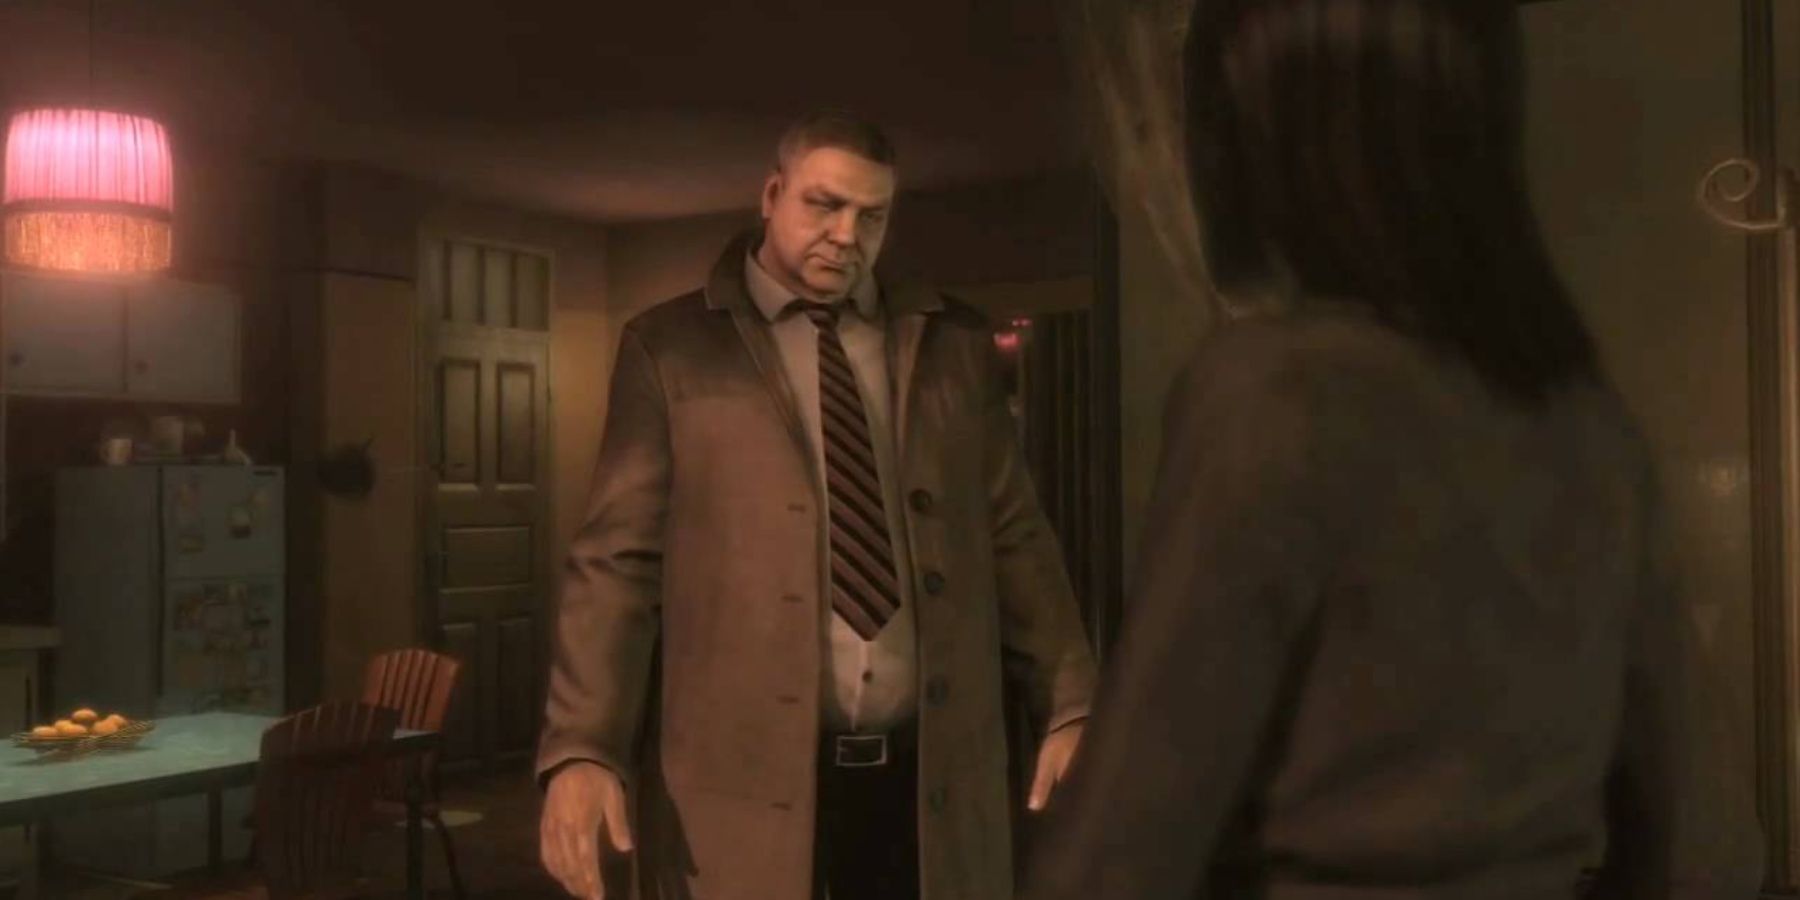 A man in a trench coat, shirt and tie standing in a house in front of a woman